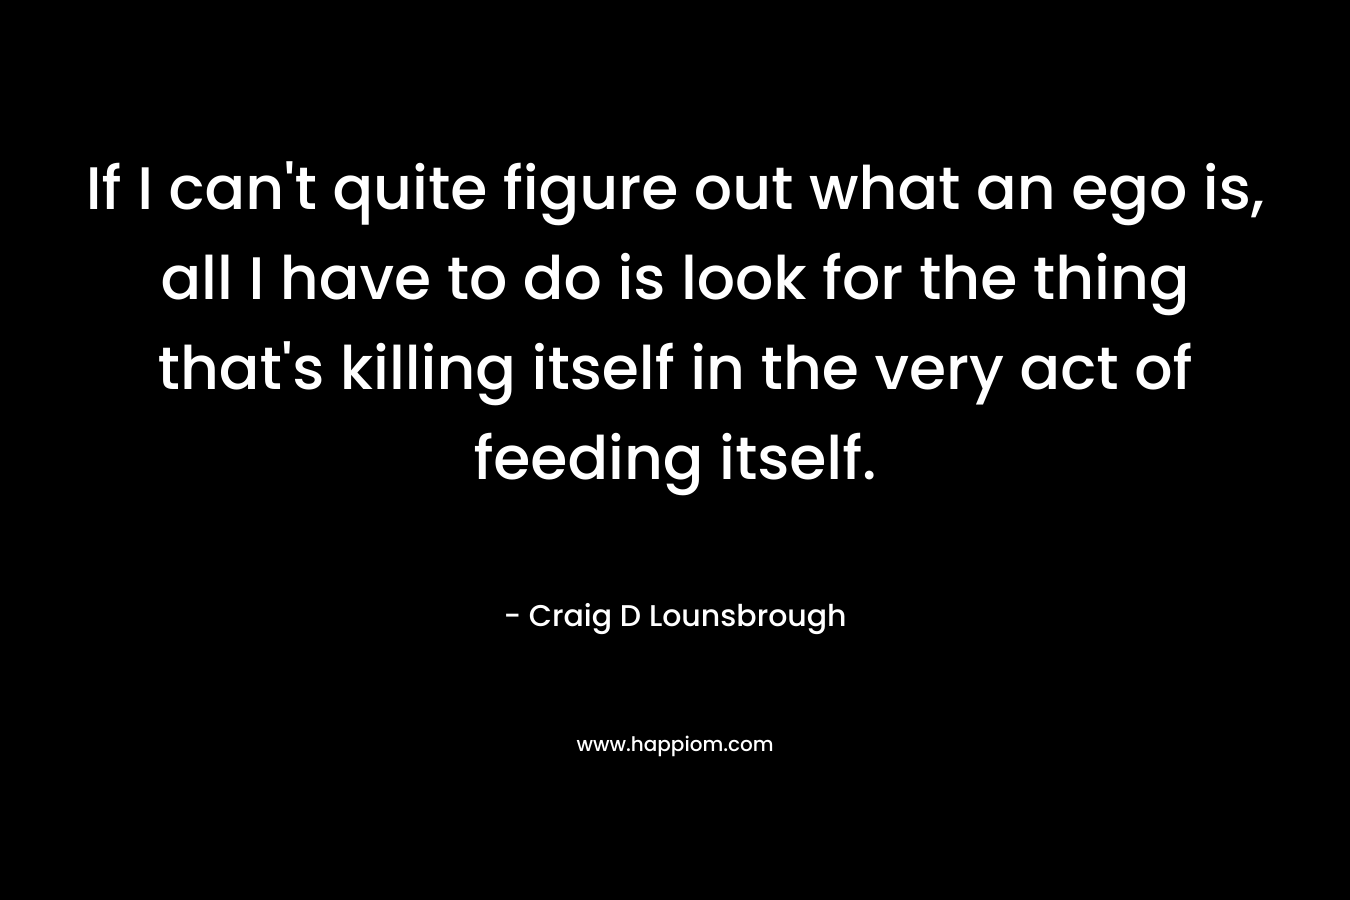 If I can't quite figure out what an ego is, all I have to do is look for the thing that's killing itself in the very act of feeding itself.